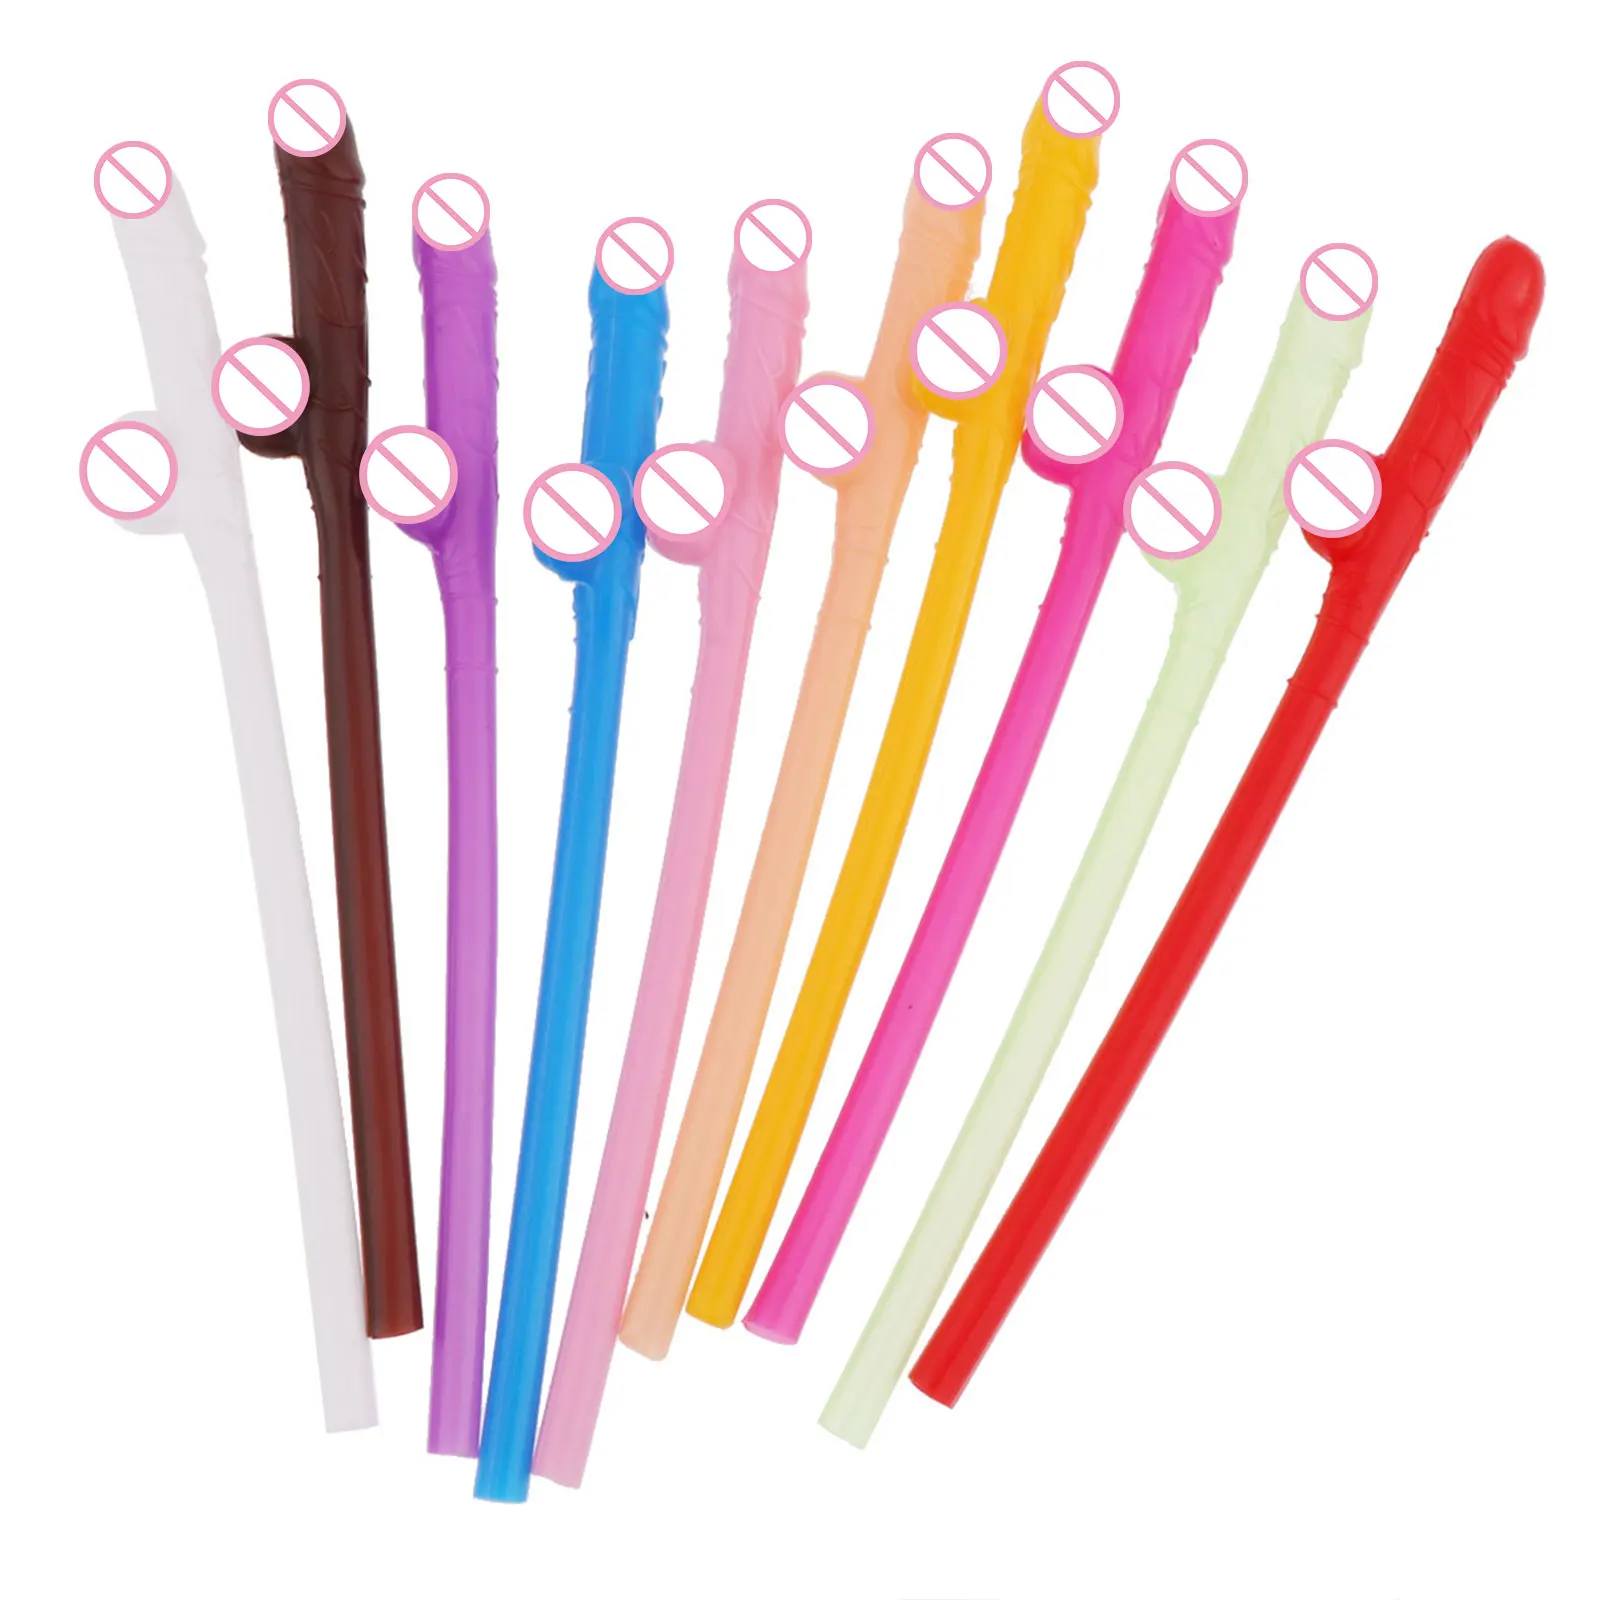 WILLY STRAWS X 12 PACK LADIES HEN PARTY NIGHT NOVELTY DICKY STRAW ACCESSORY 